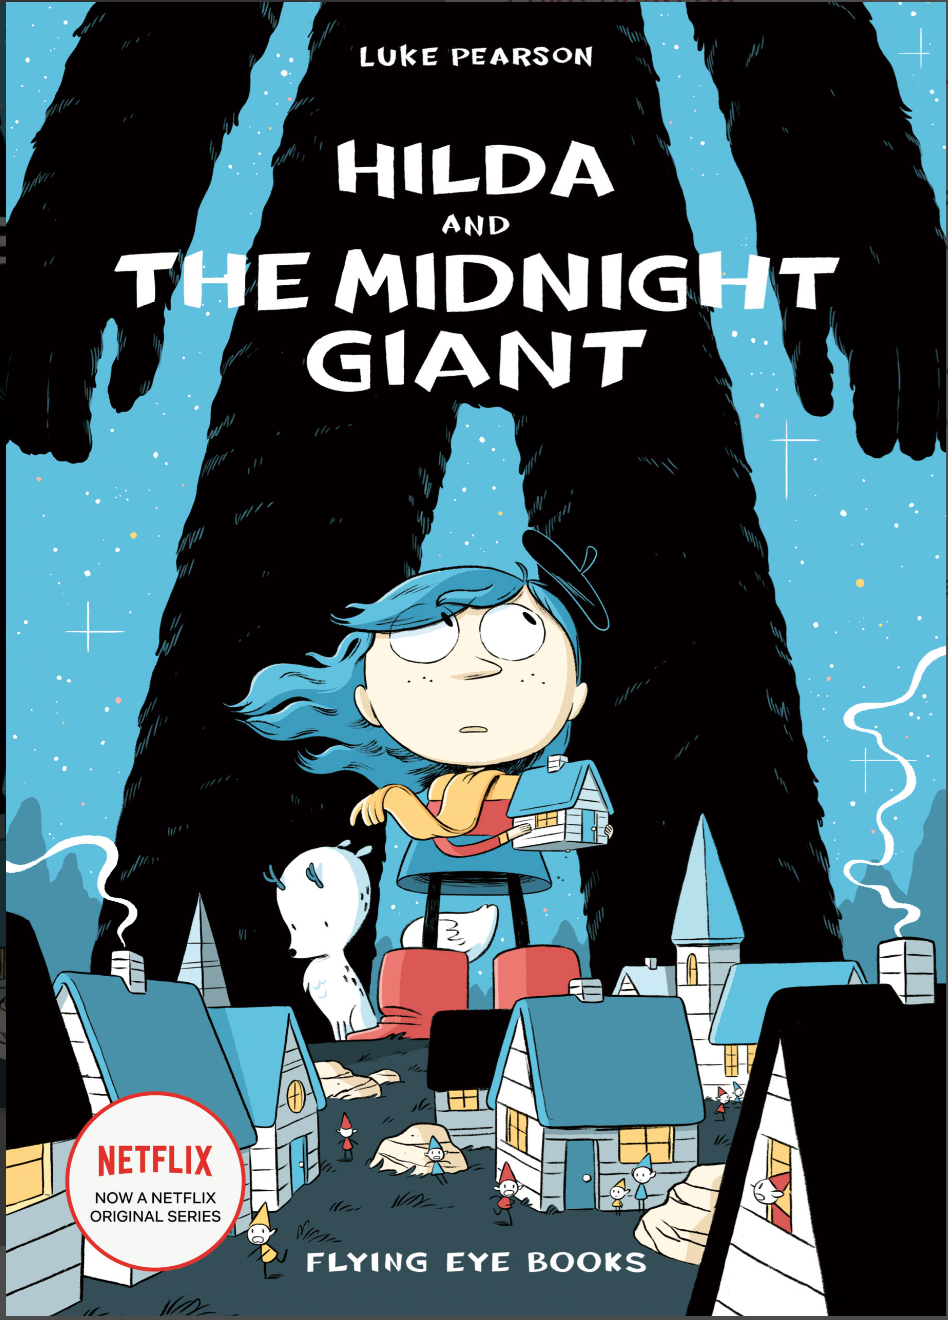 HILDA AND THE MIDNIGHT GIANT